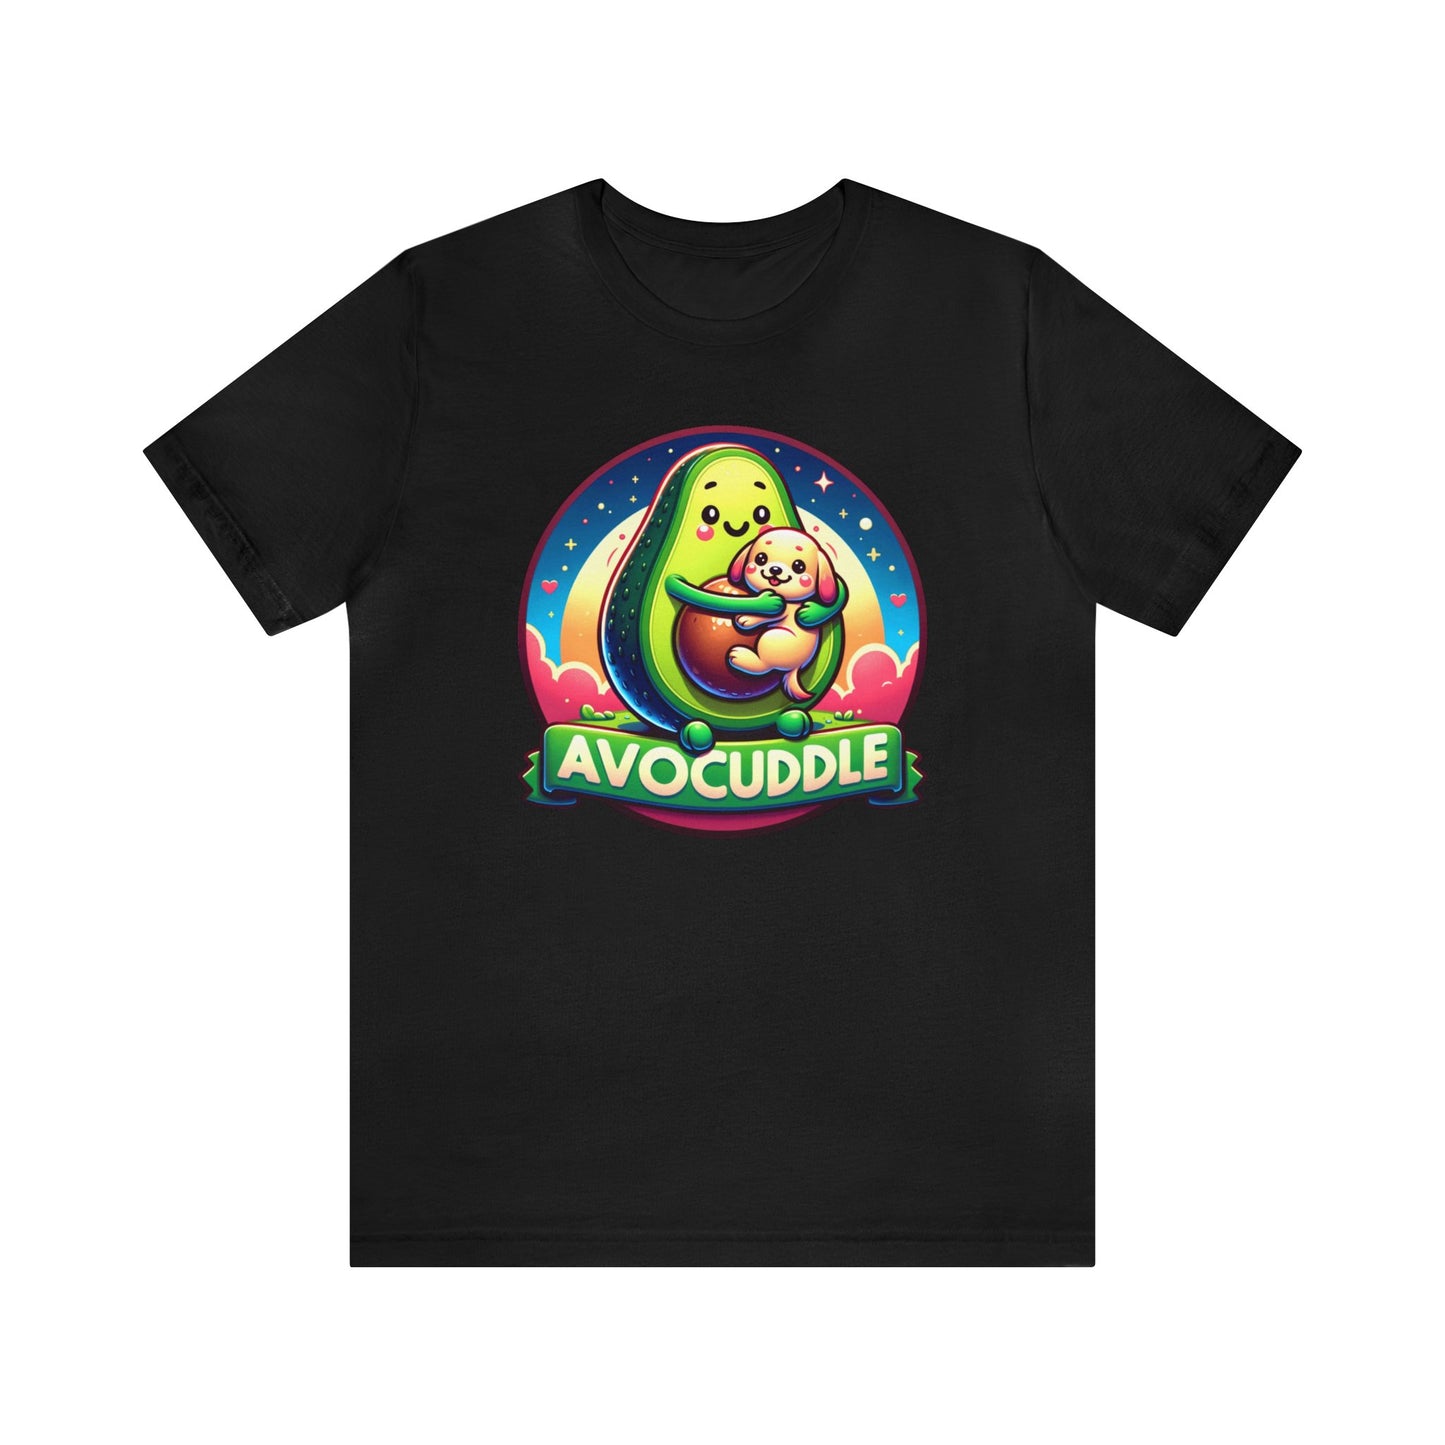 Adorable Avocado and Puppy Love: Novelty T-Shirt for Dog and Avocado Lovers - Blend of Cuteness with a Health Conscious Fashion Statement